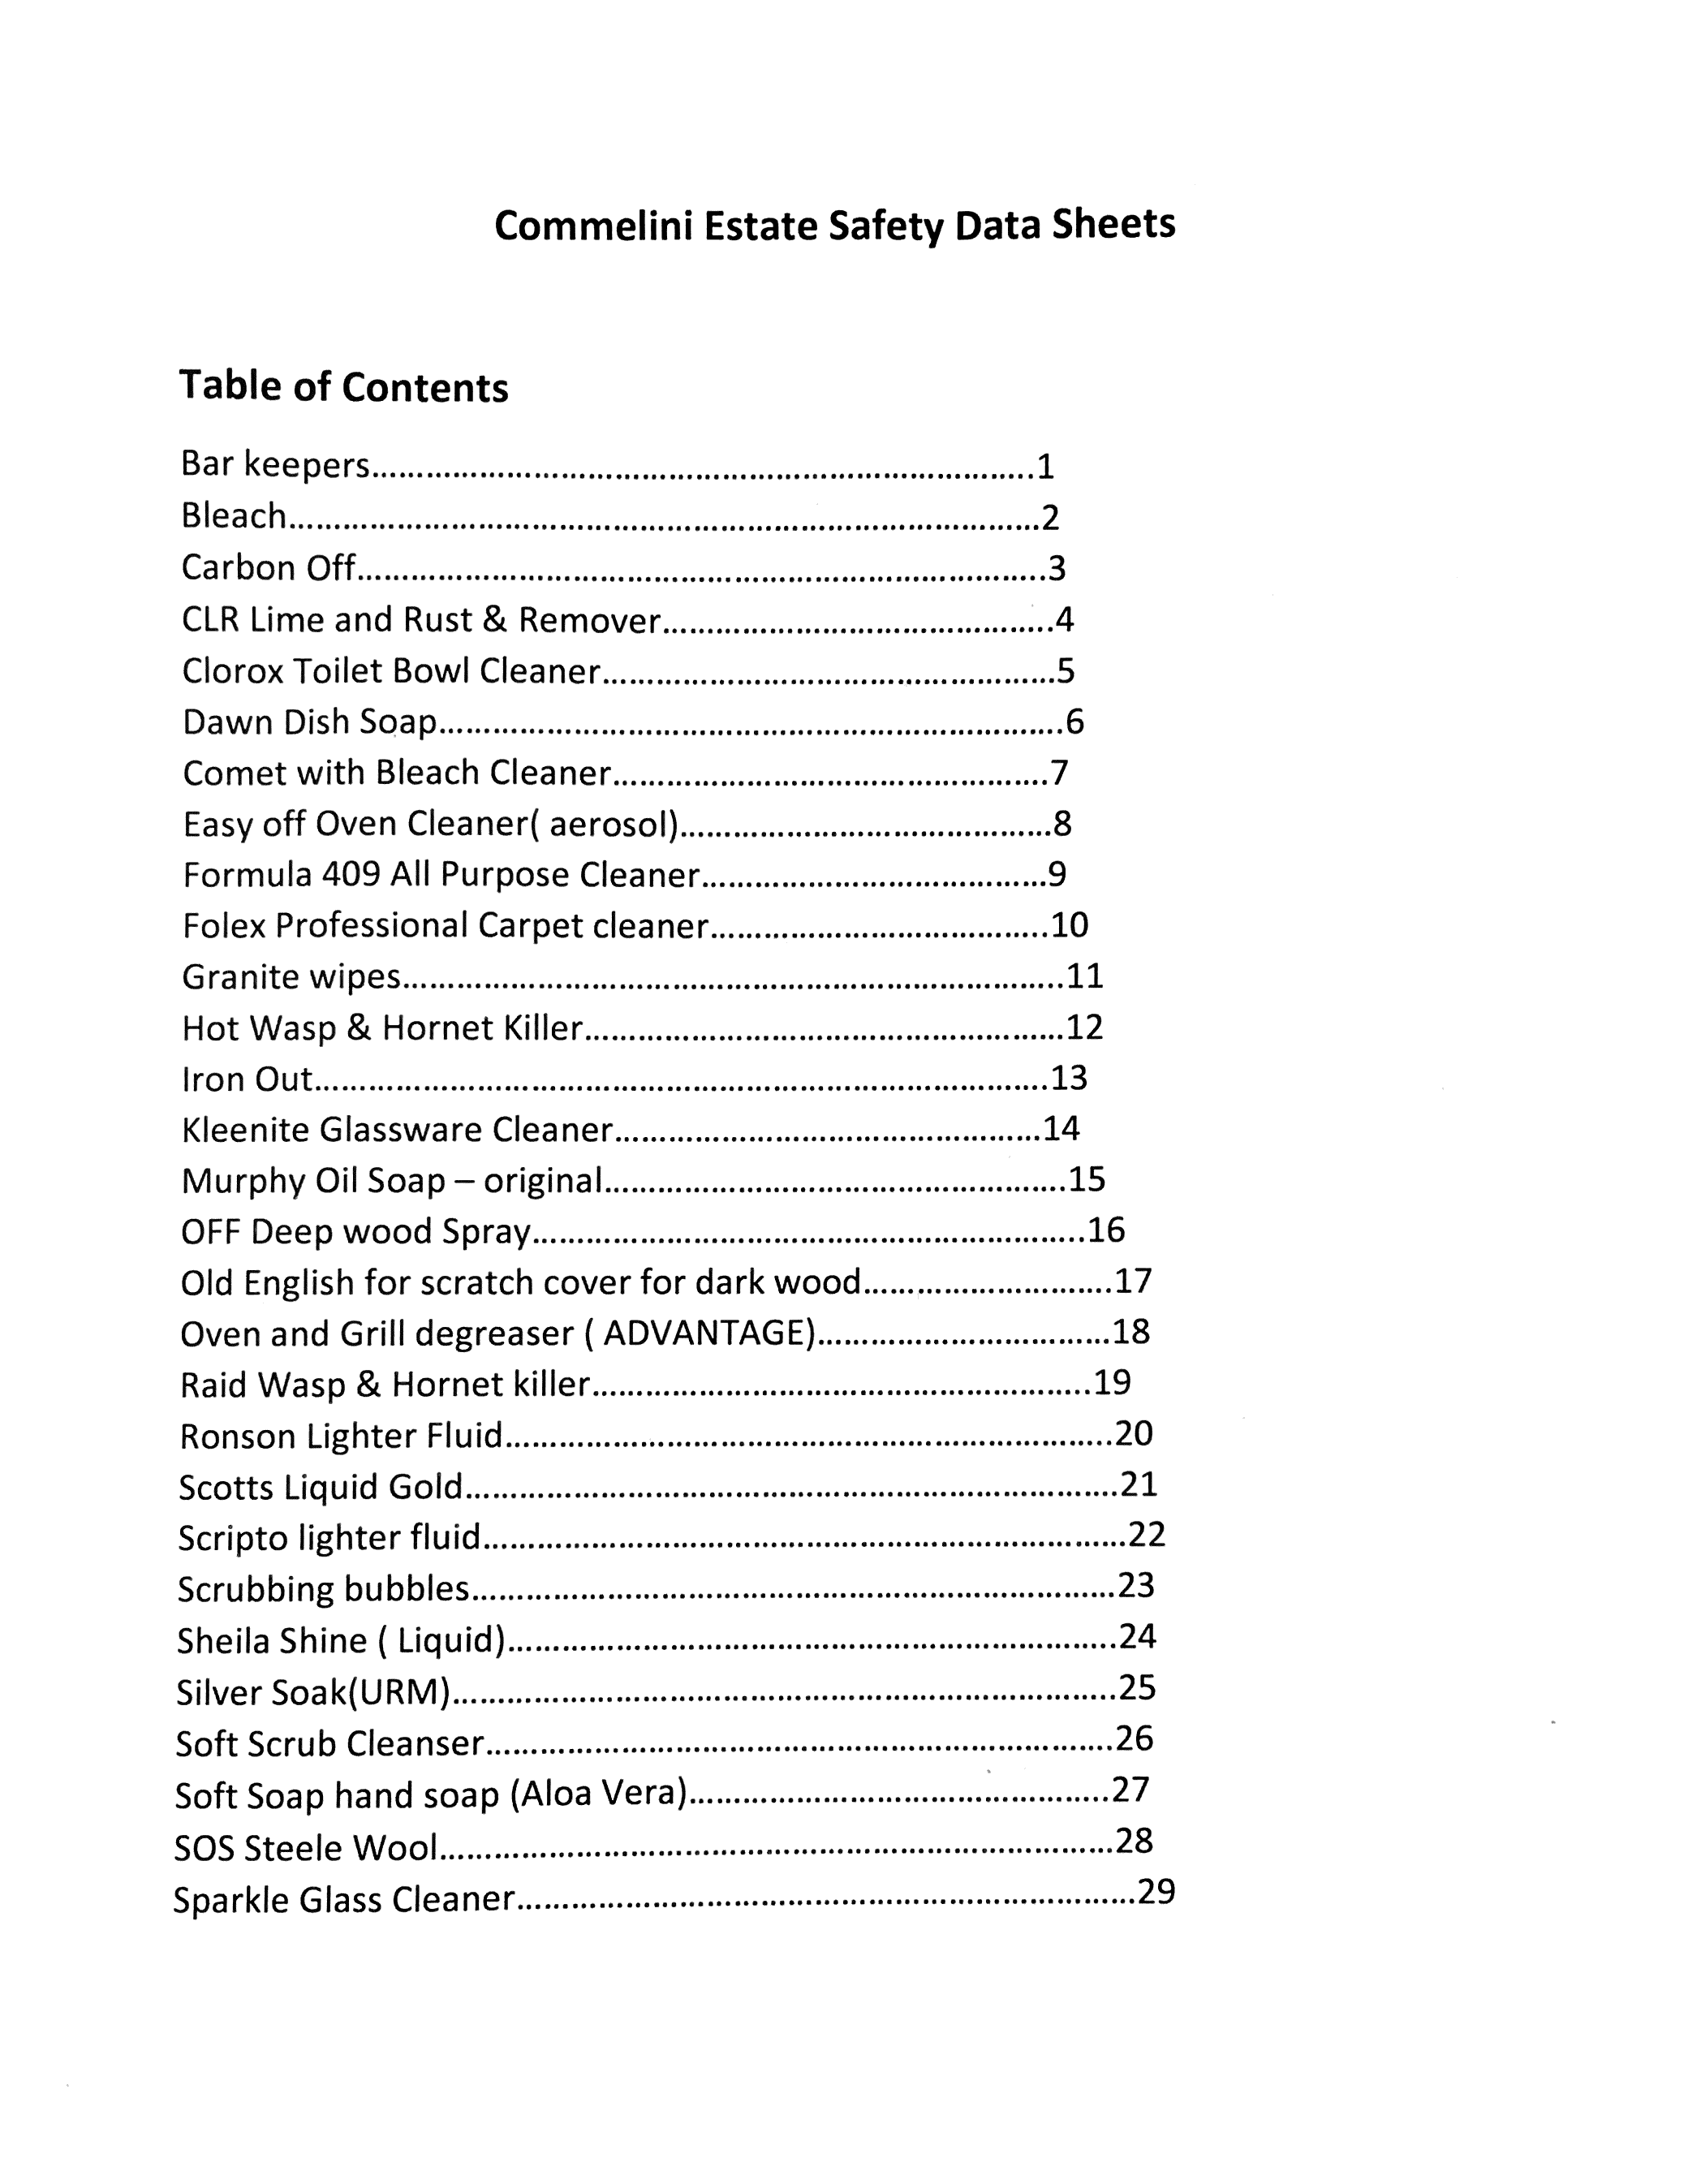 Sds Table Of Contents Template